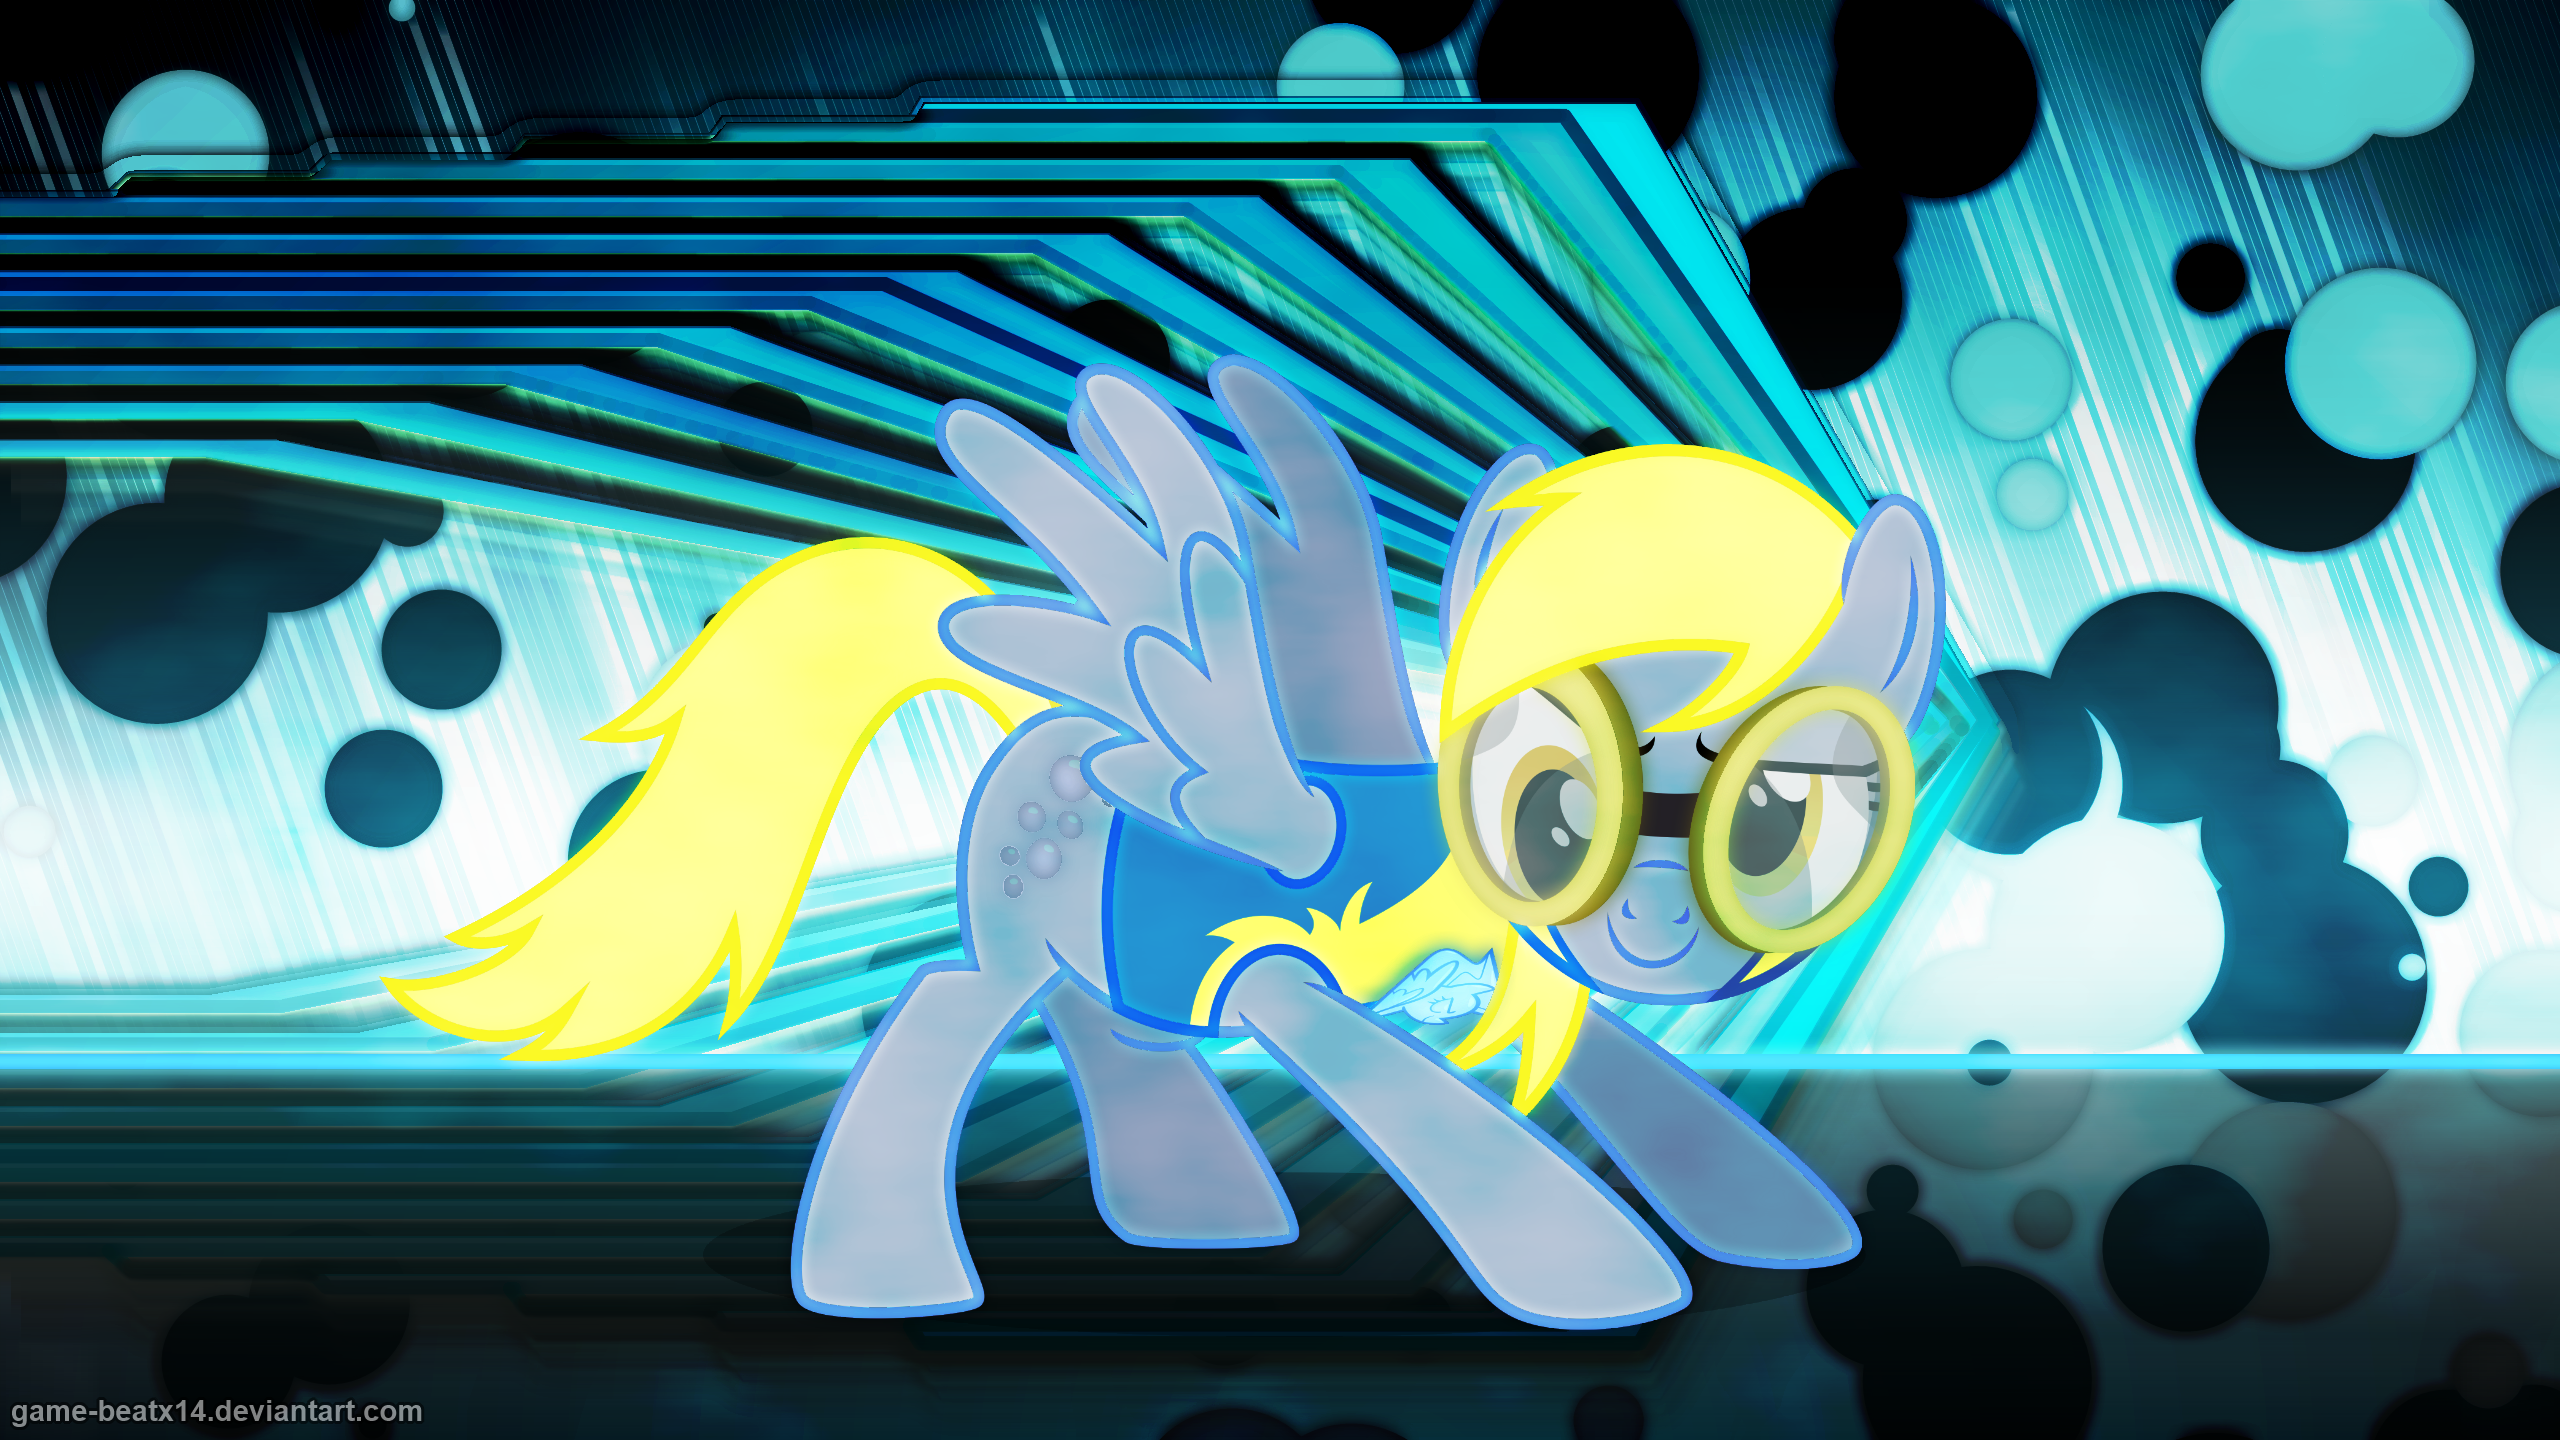 That Wonderbolt is a Derpy by ChainChomp2 and Game-BeatX14